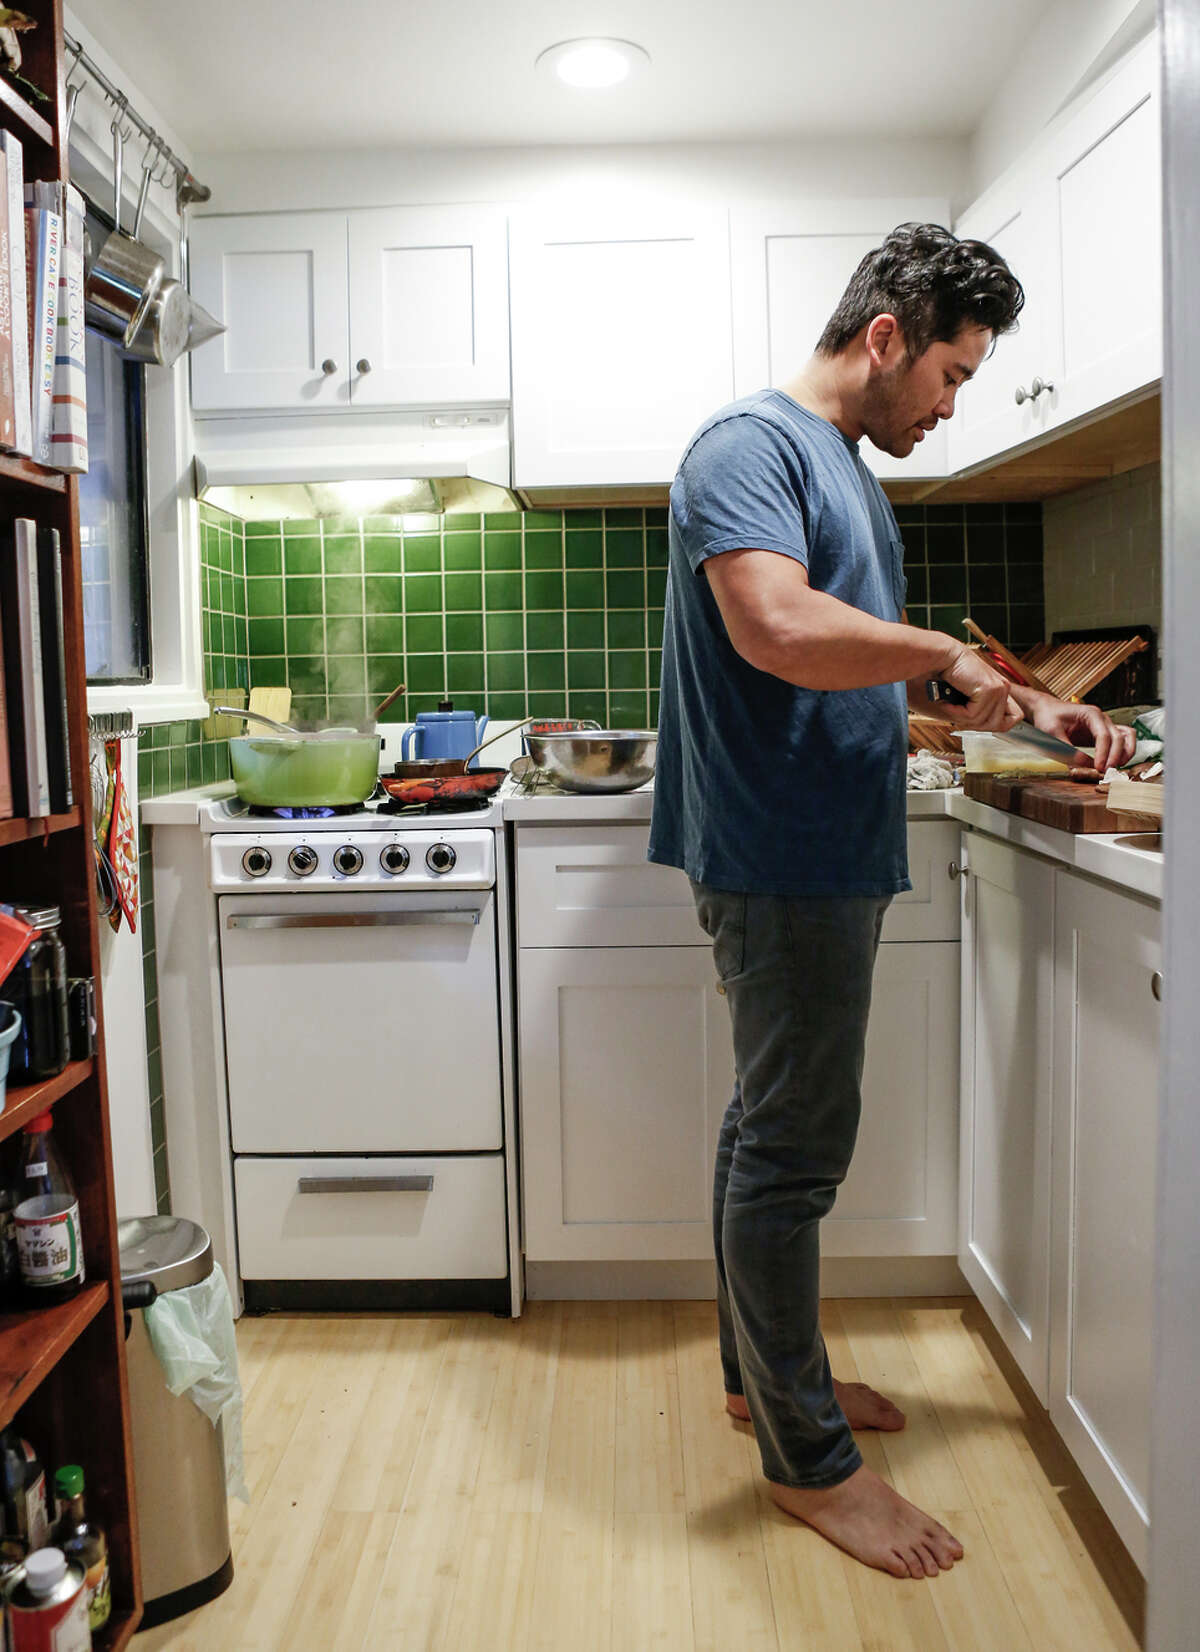 Jew in the tiny kitchen of his S.F. apartment: “I want to celebrate tradition, but I also want to make food that tastes good to me.”